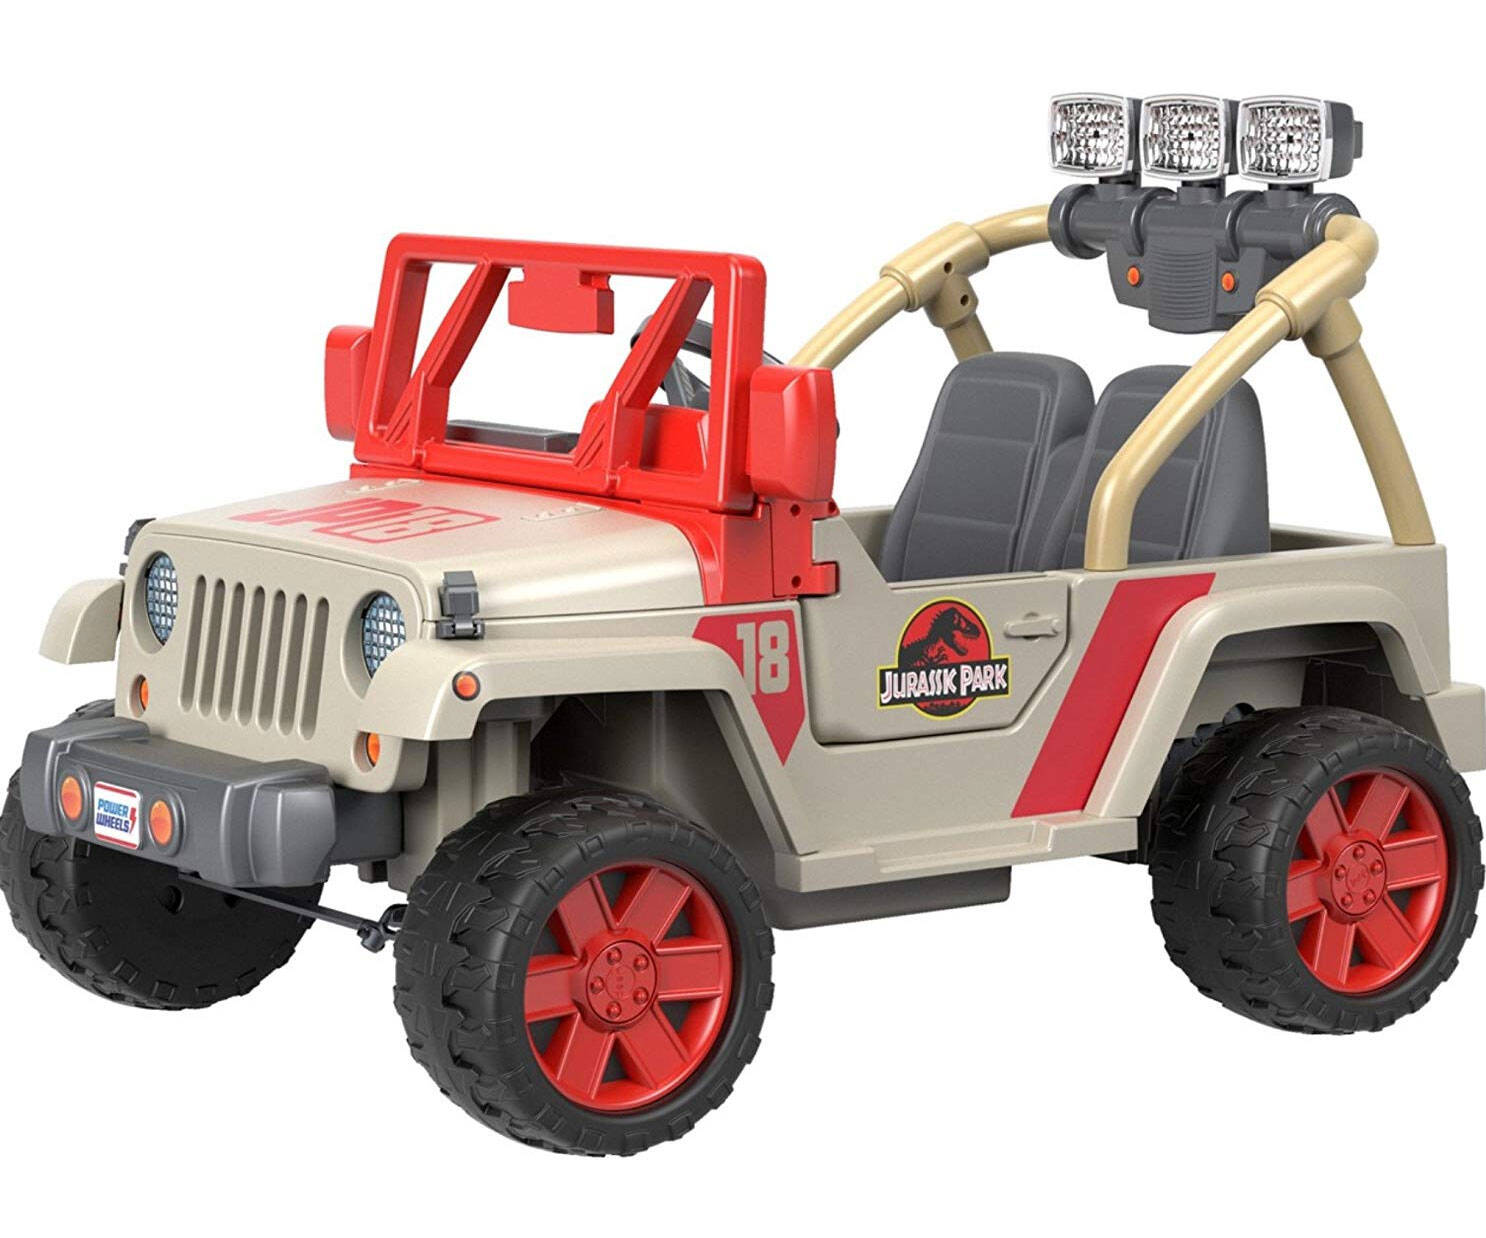 Jurassic Park Kids Ride-On Jeep - //coolthings.us